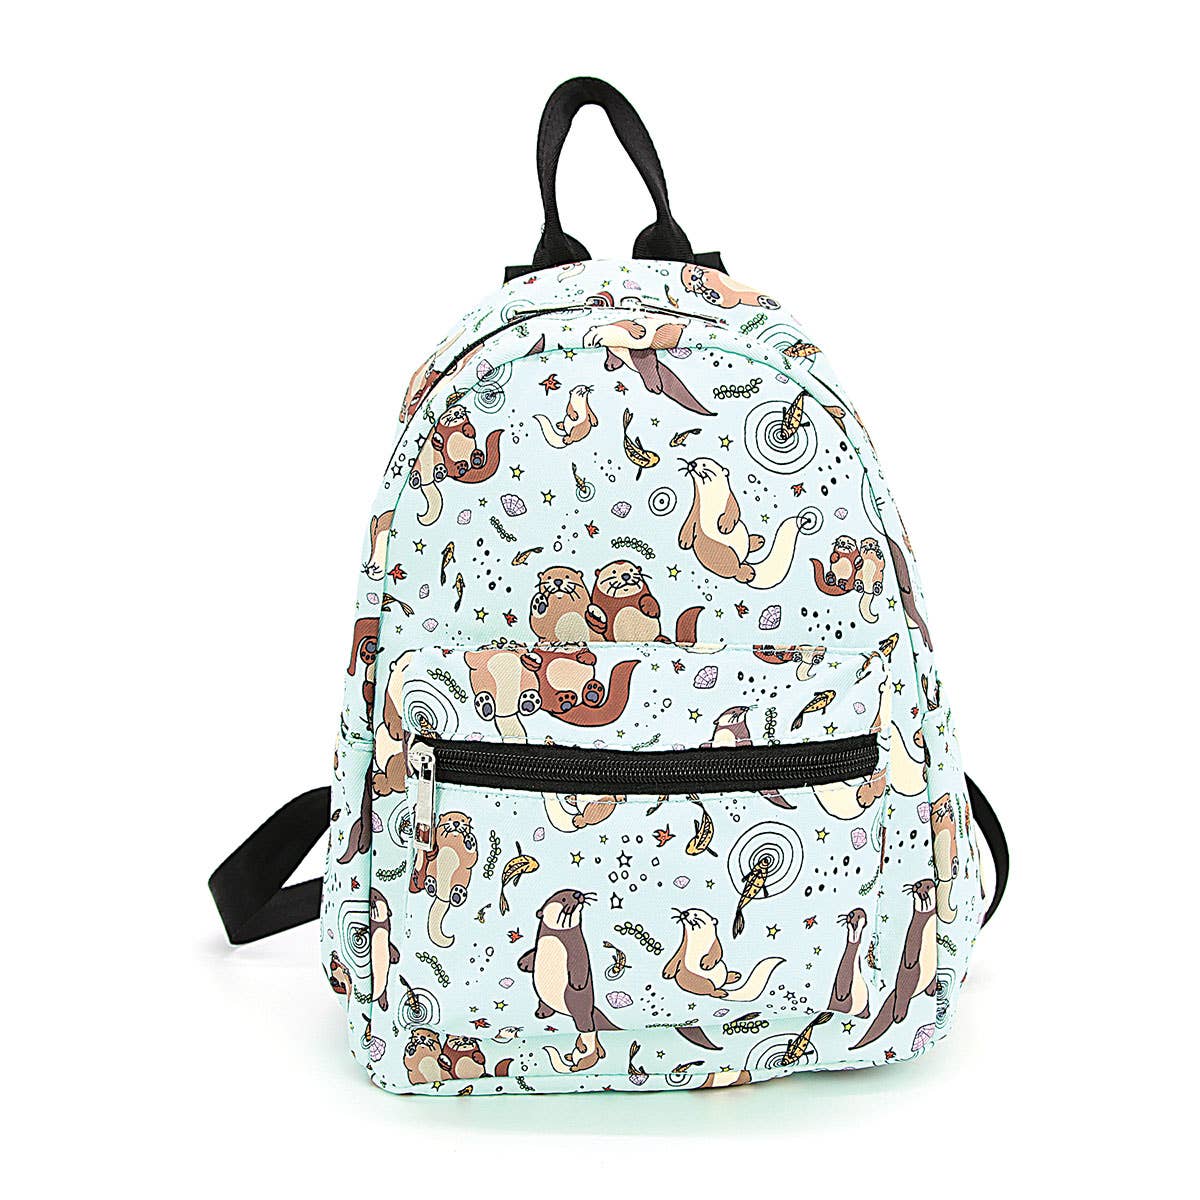 SEA OTTERS MINI BACKPACK IN POLYESTER